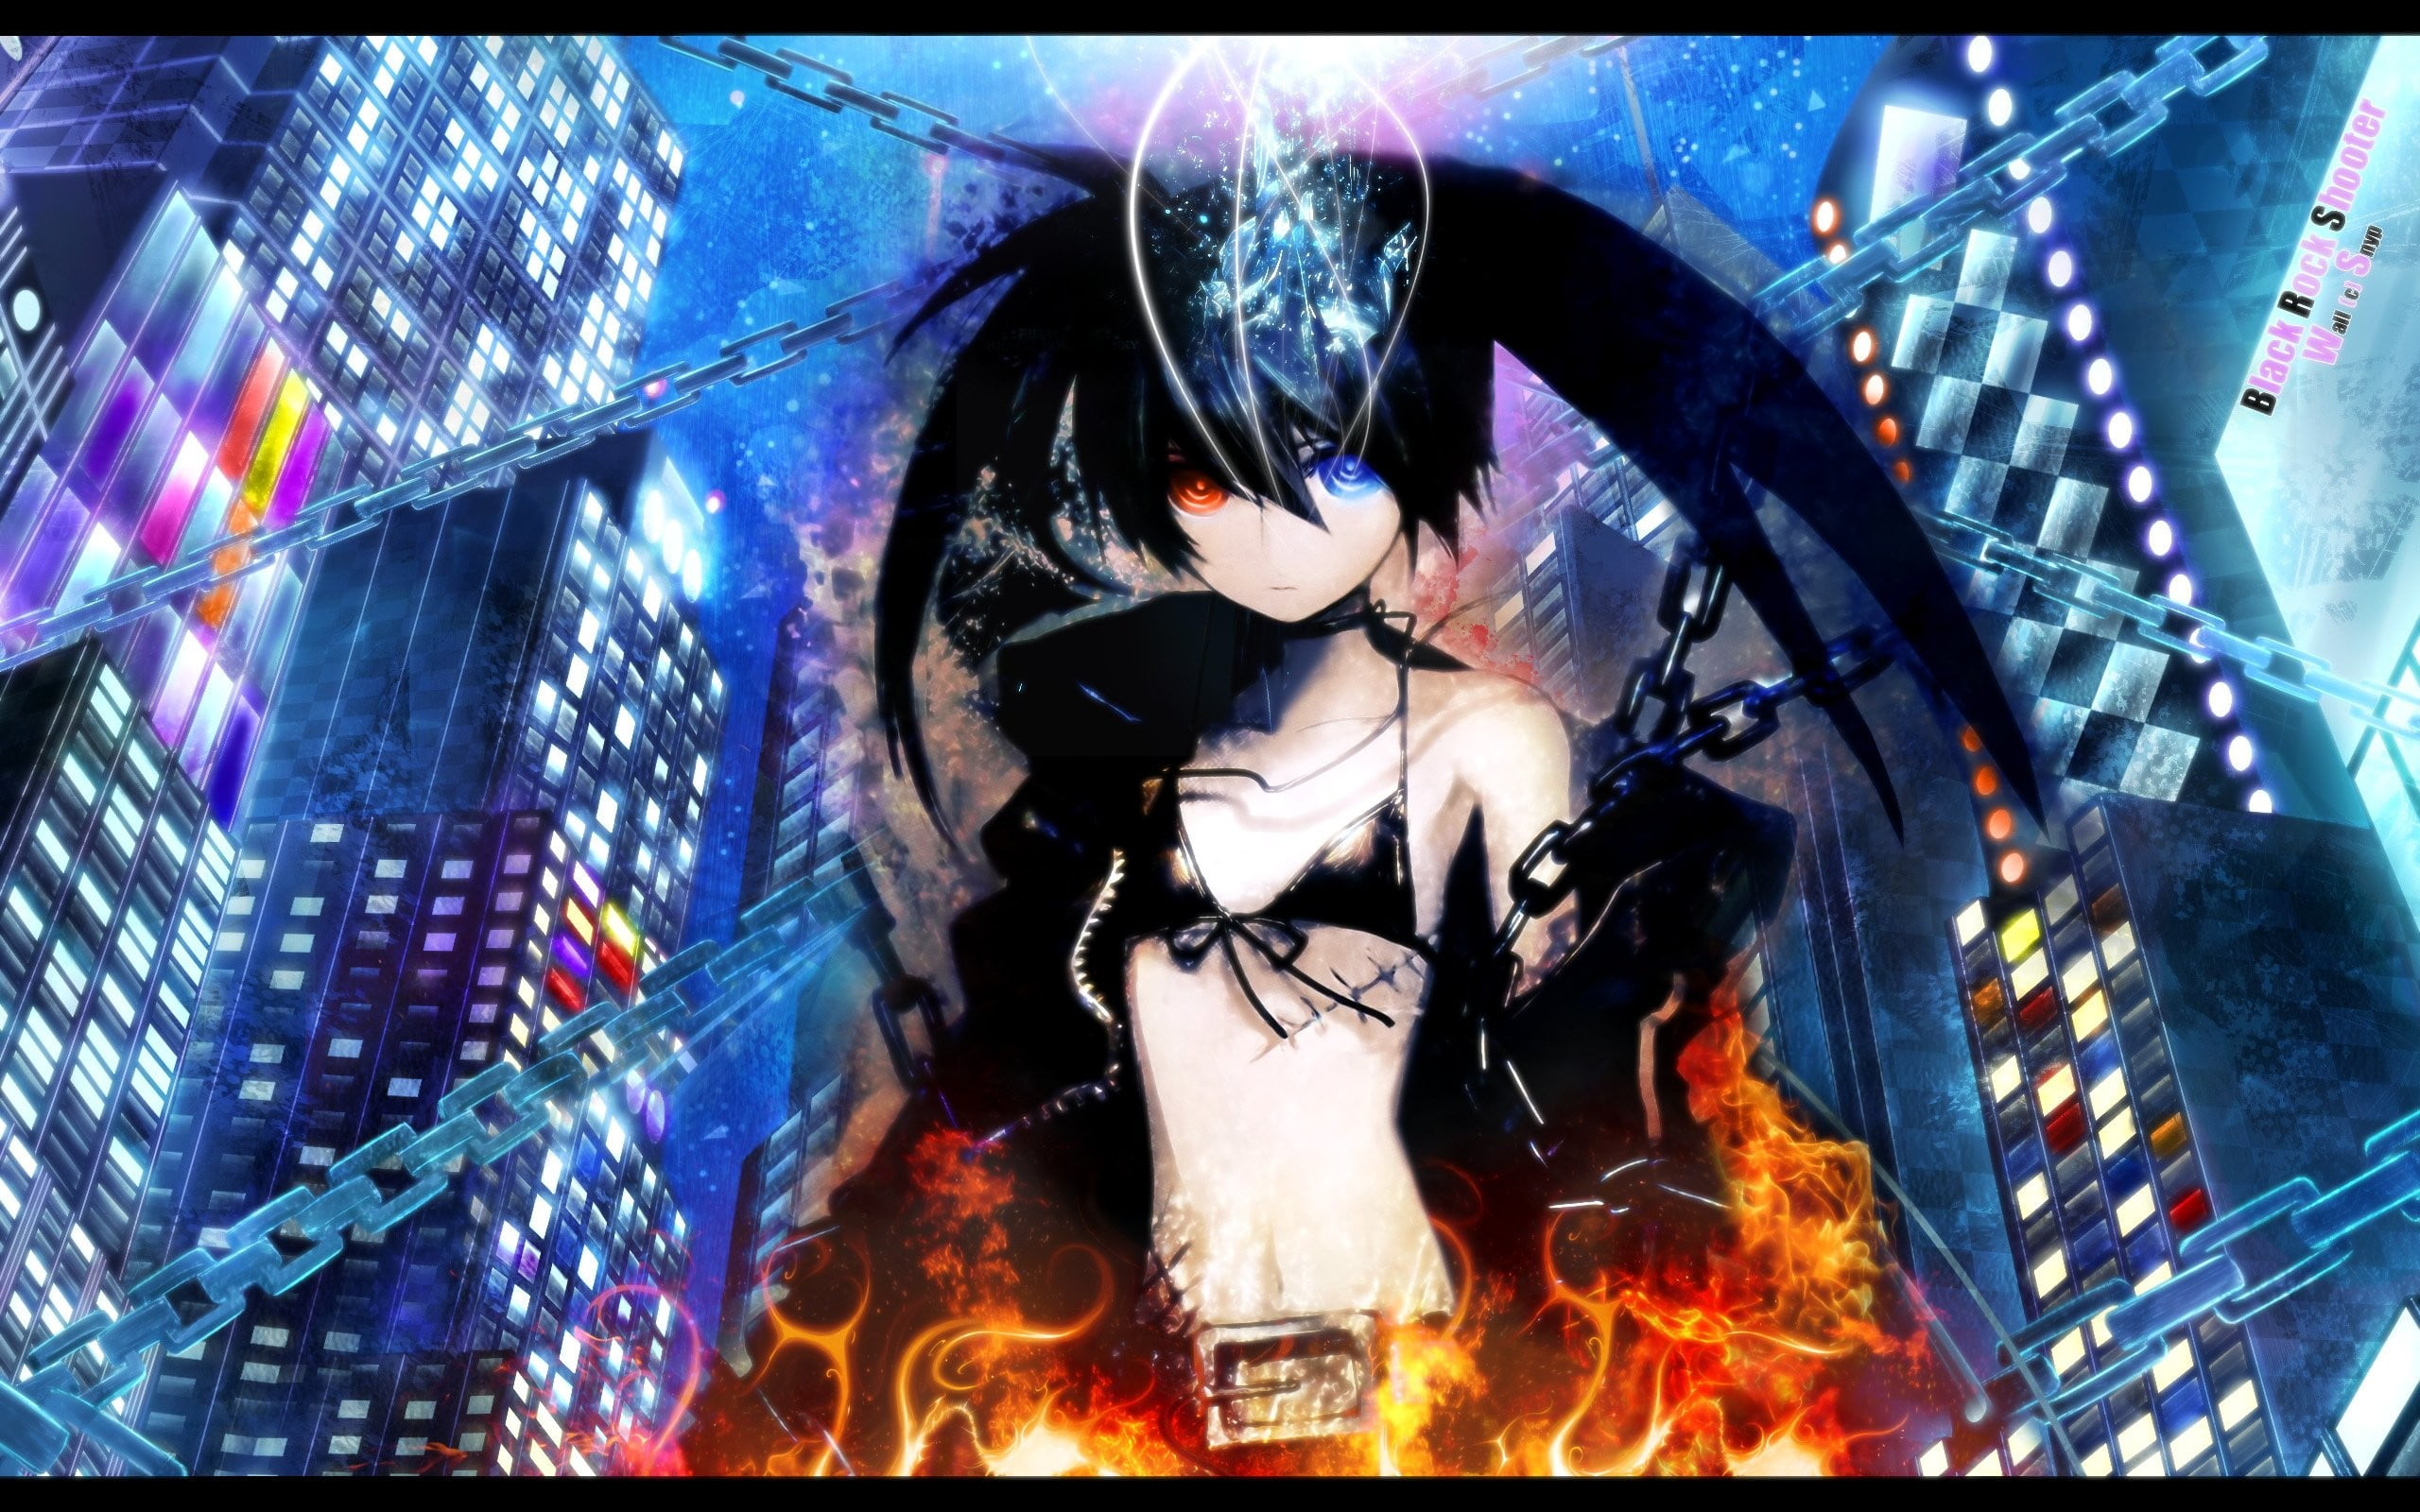 man animated character illustration, Black Rock Shooter, red eyes